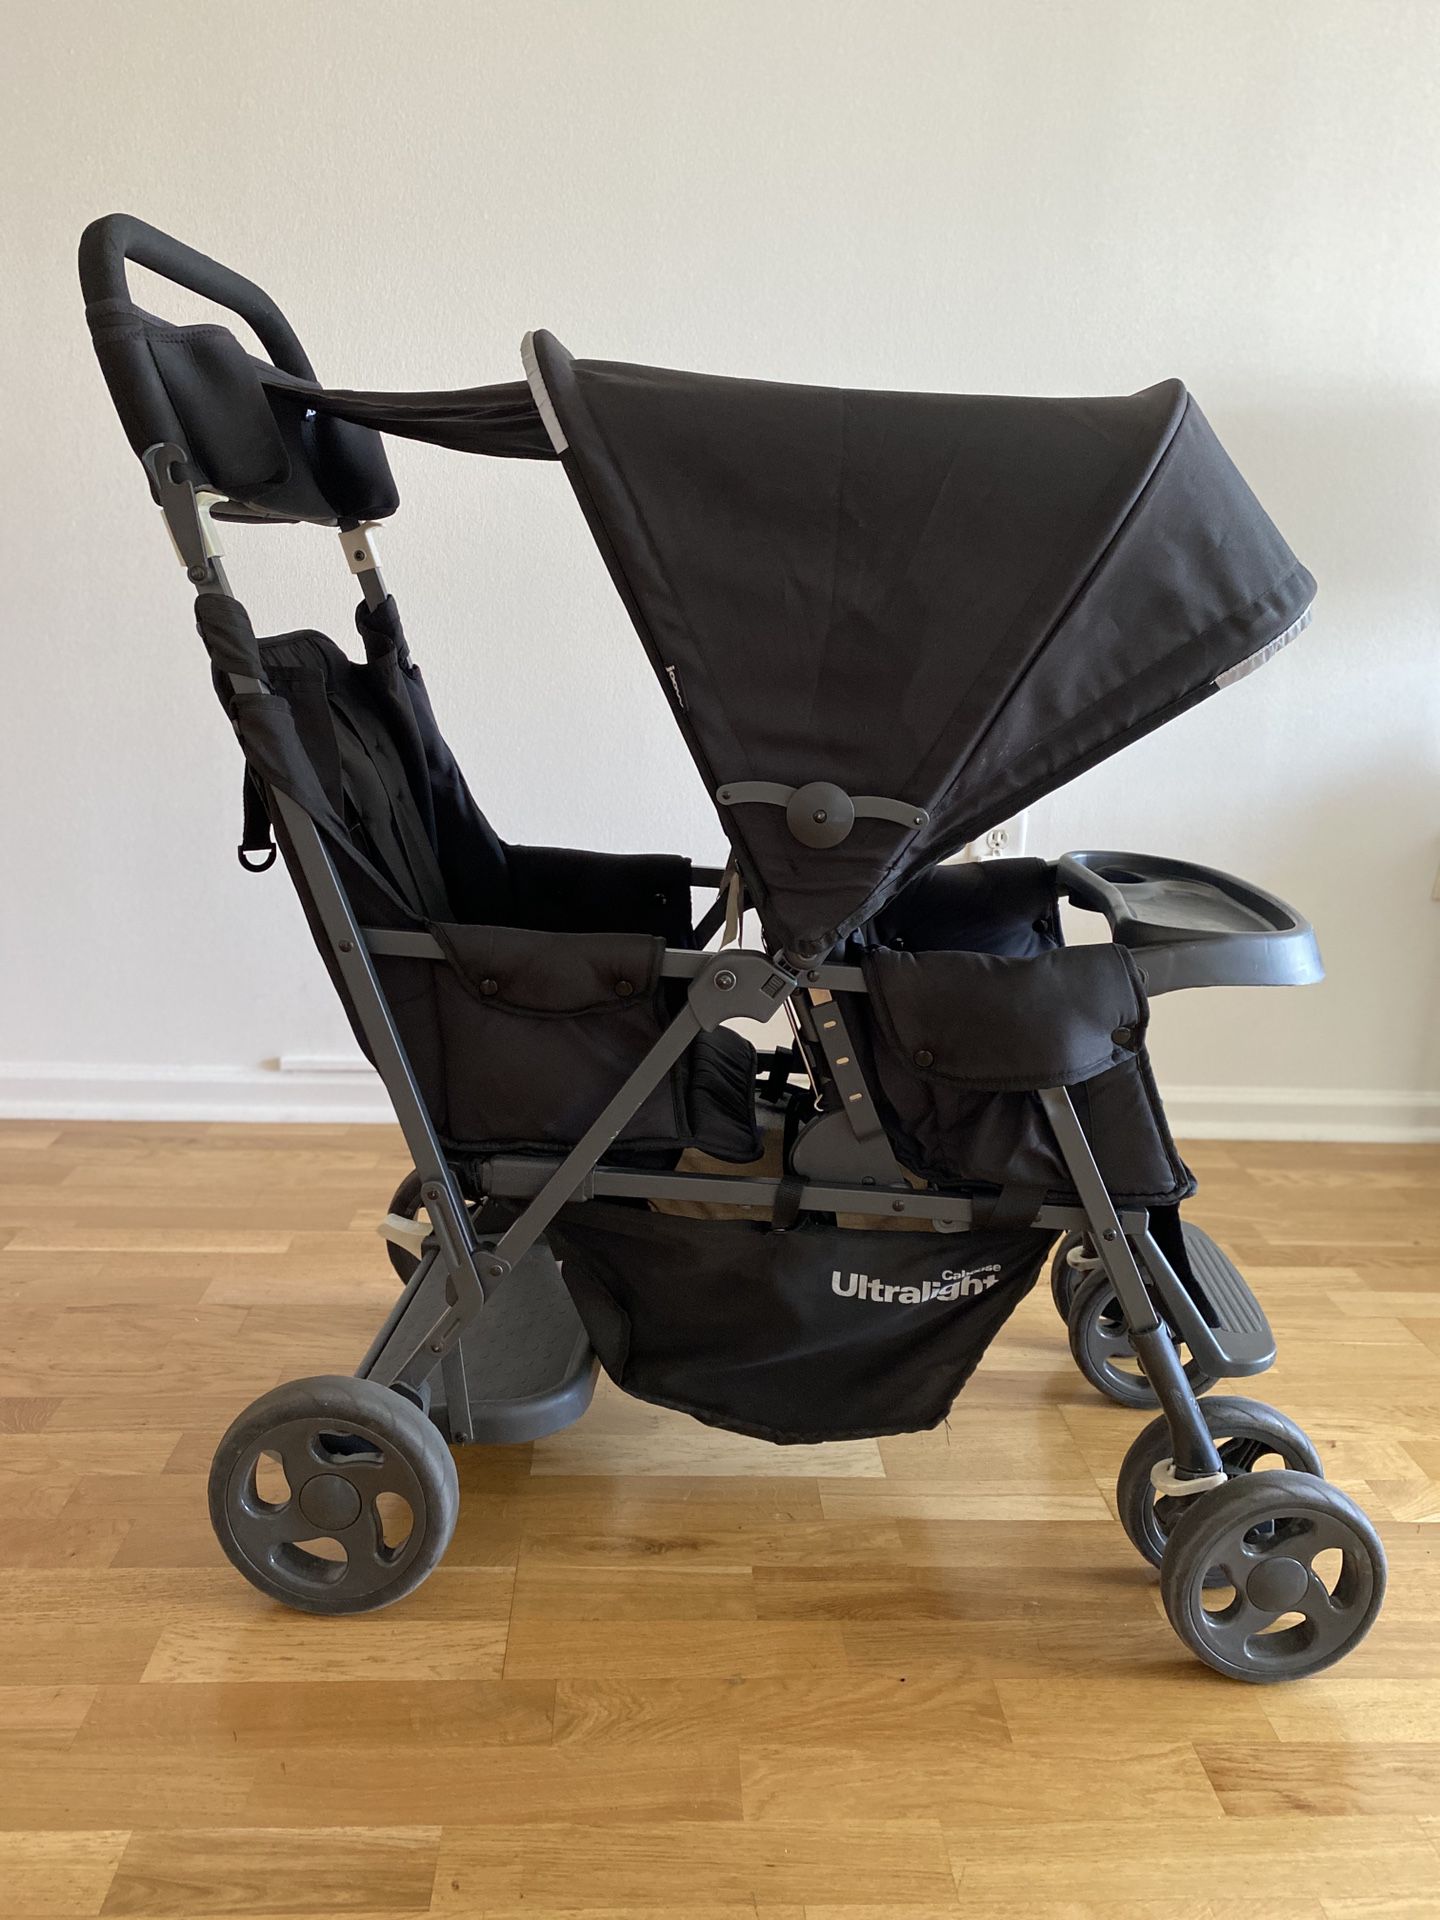 Ultralight Joovy Caboose double stroller sit and stand.